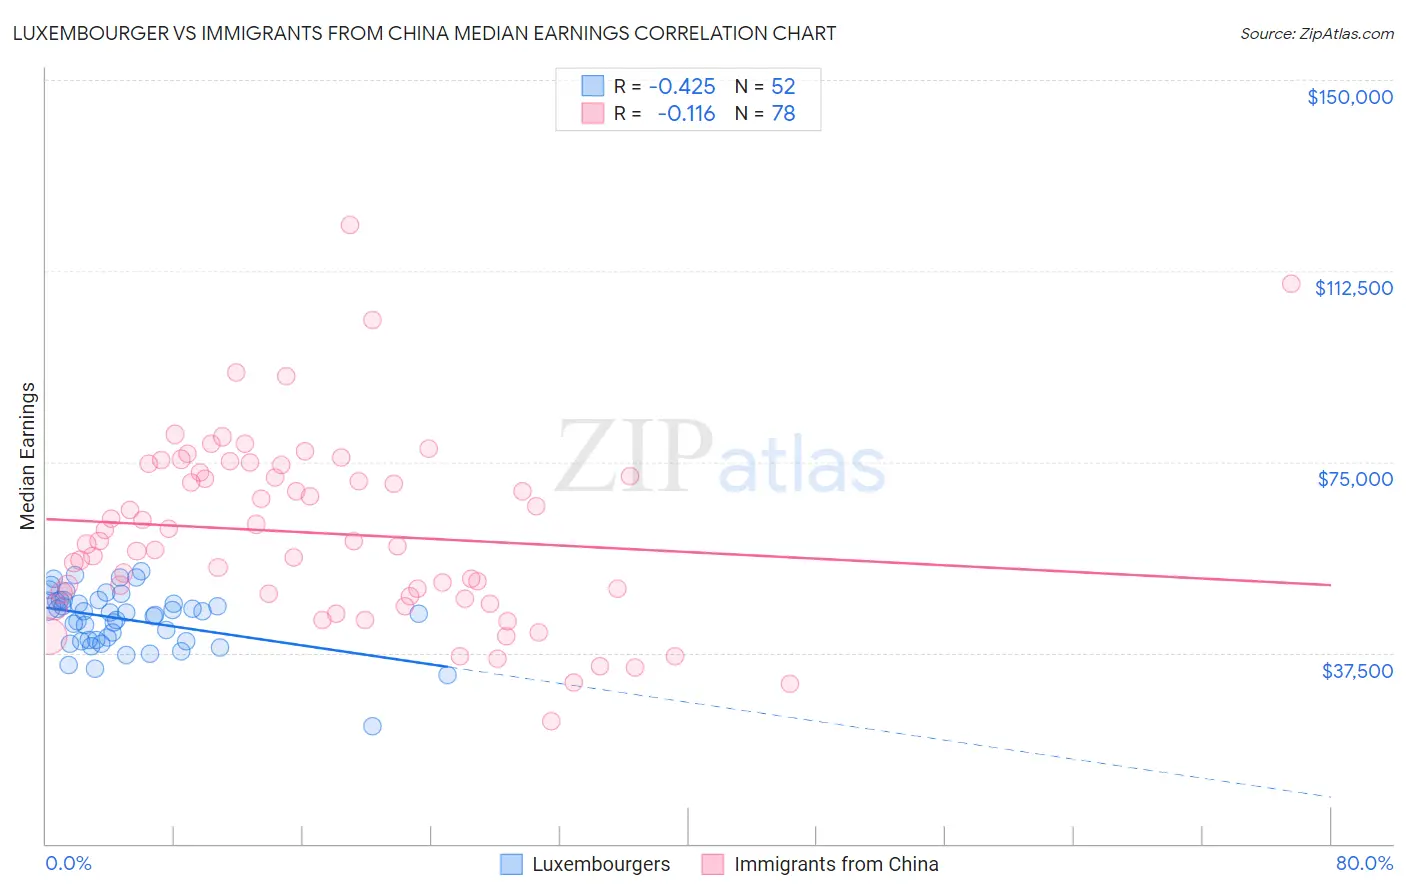 Luxembourger vs Immigrants from China Median Earnings